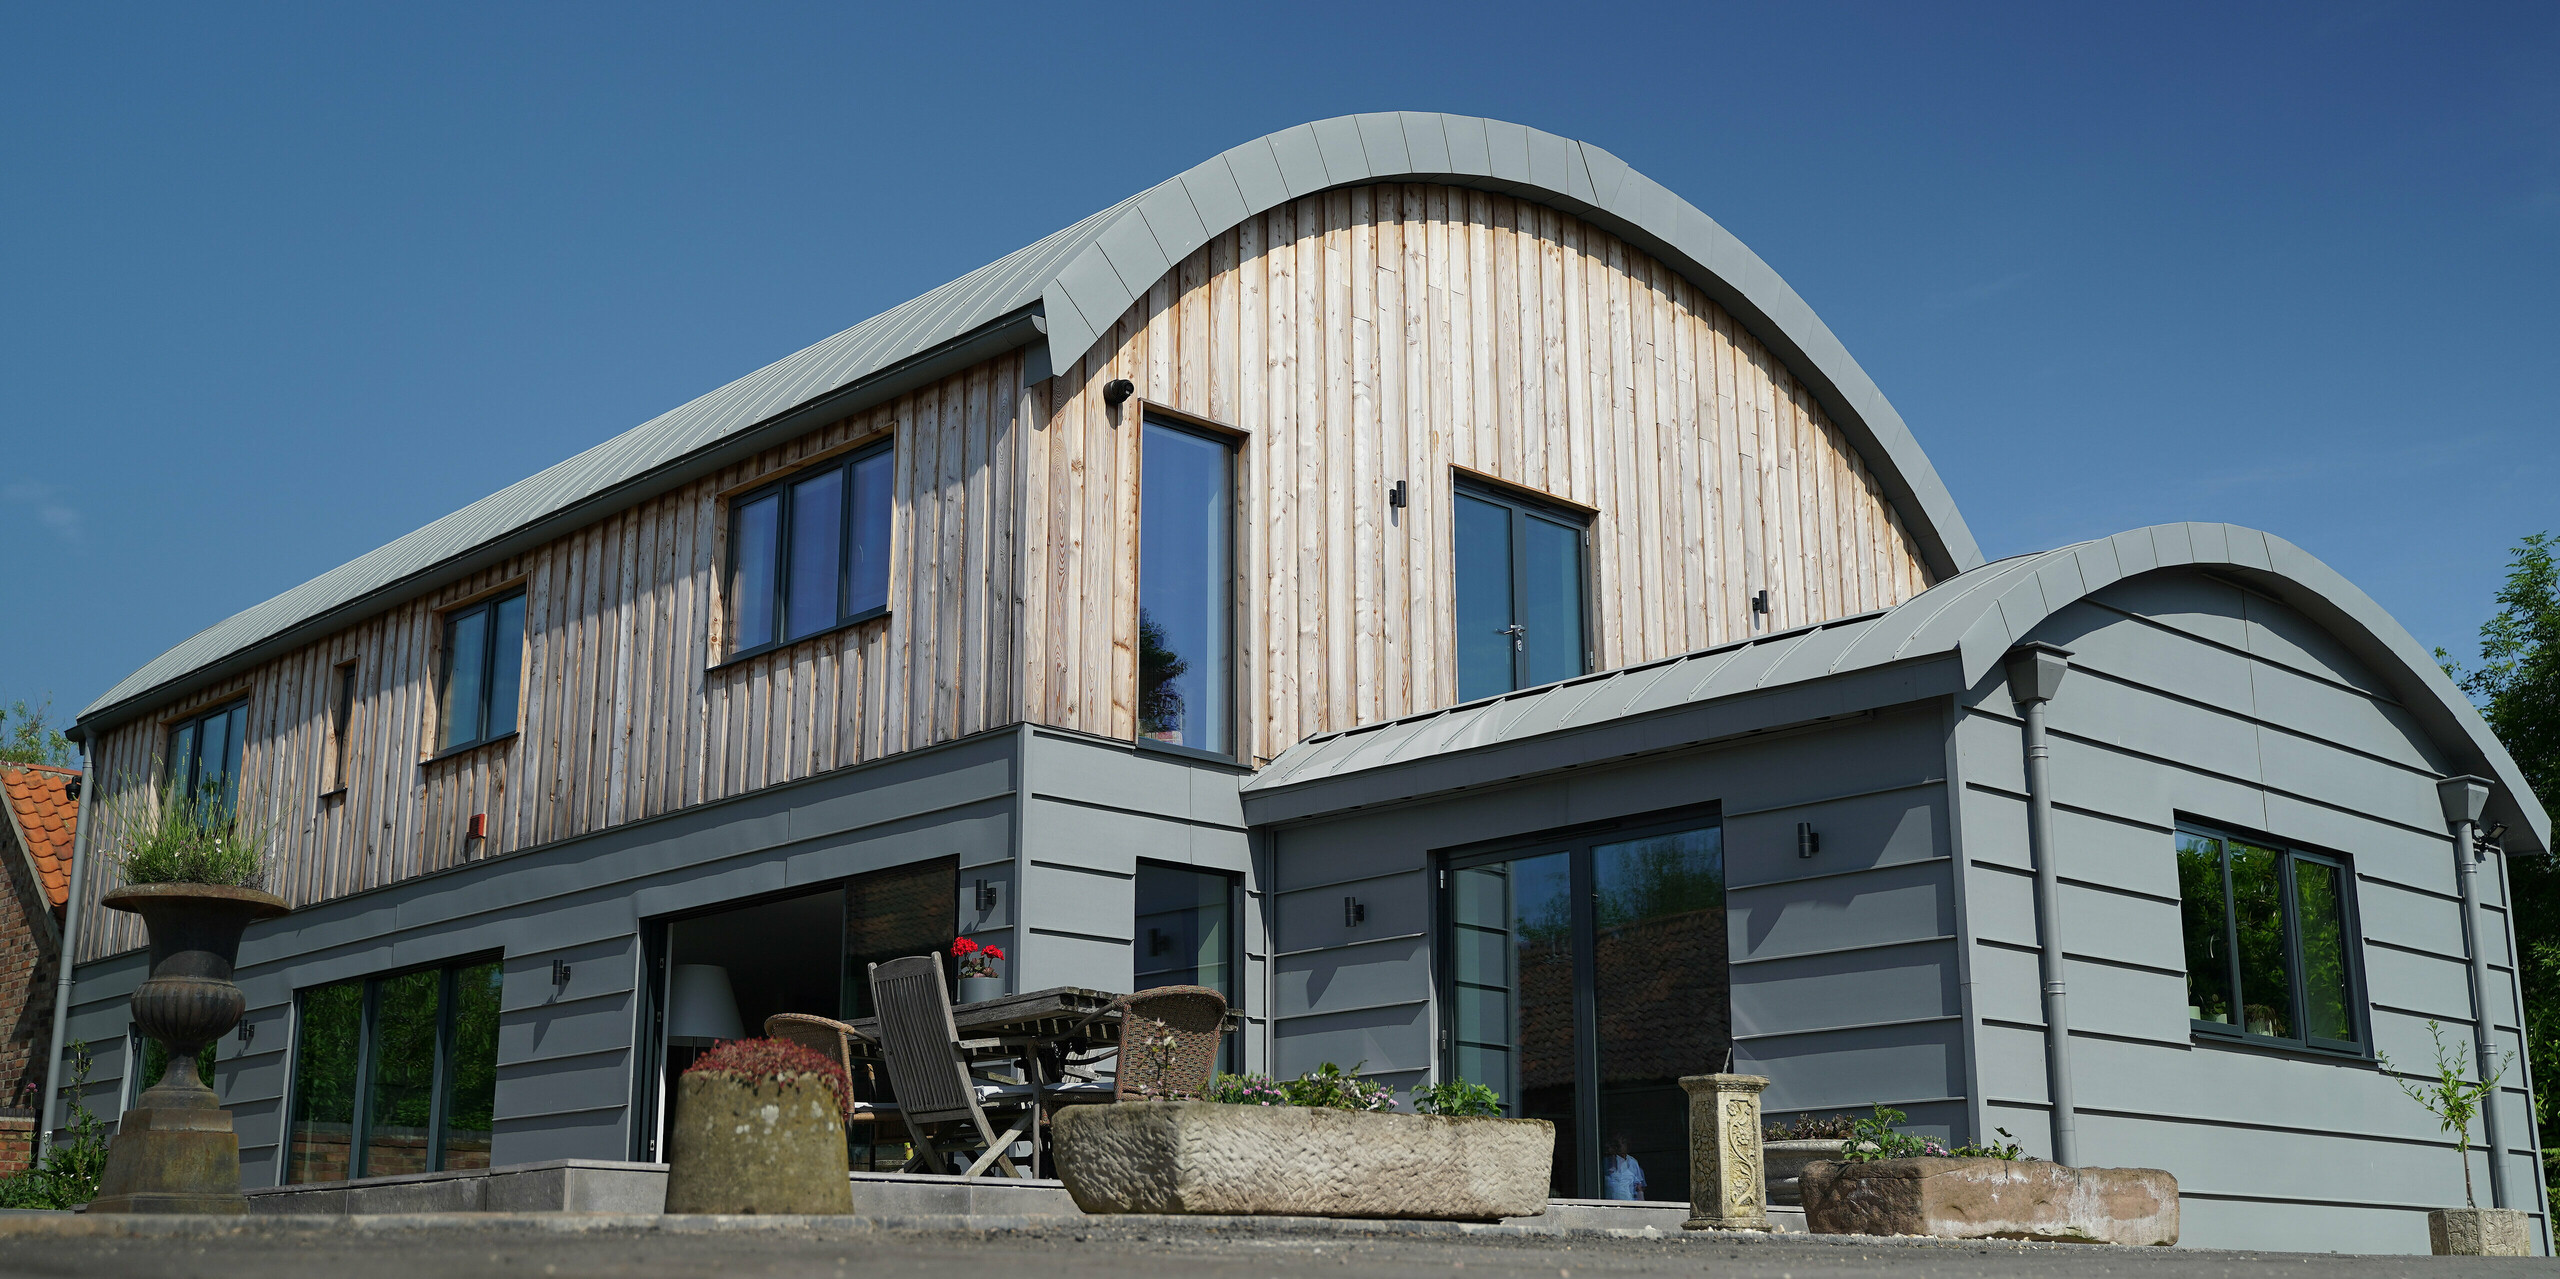 Lateral perspective on the Dutch barn clad with wood and PREFALZ in patina grey